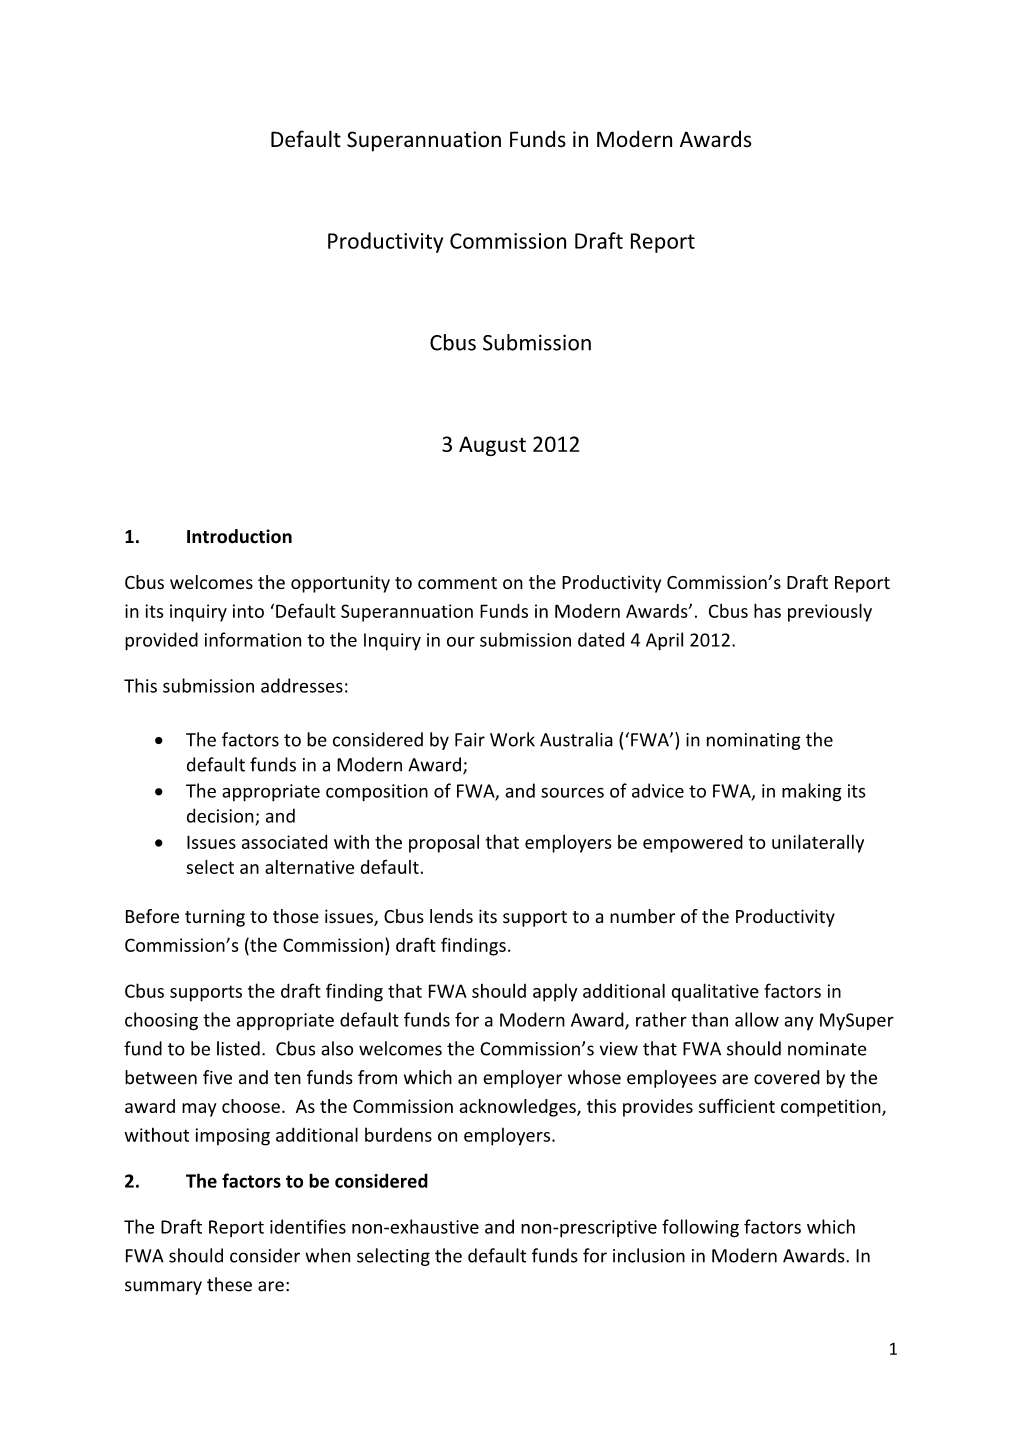 Submission DR81 - Cbus - Default Superannuation Funds in Modern Awards - Public Inquiry